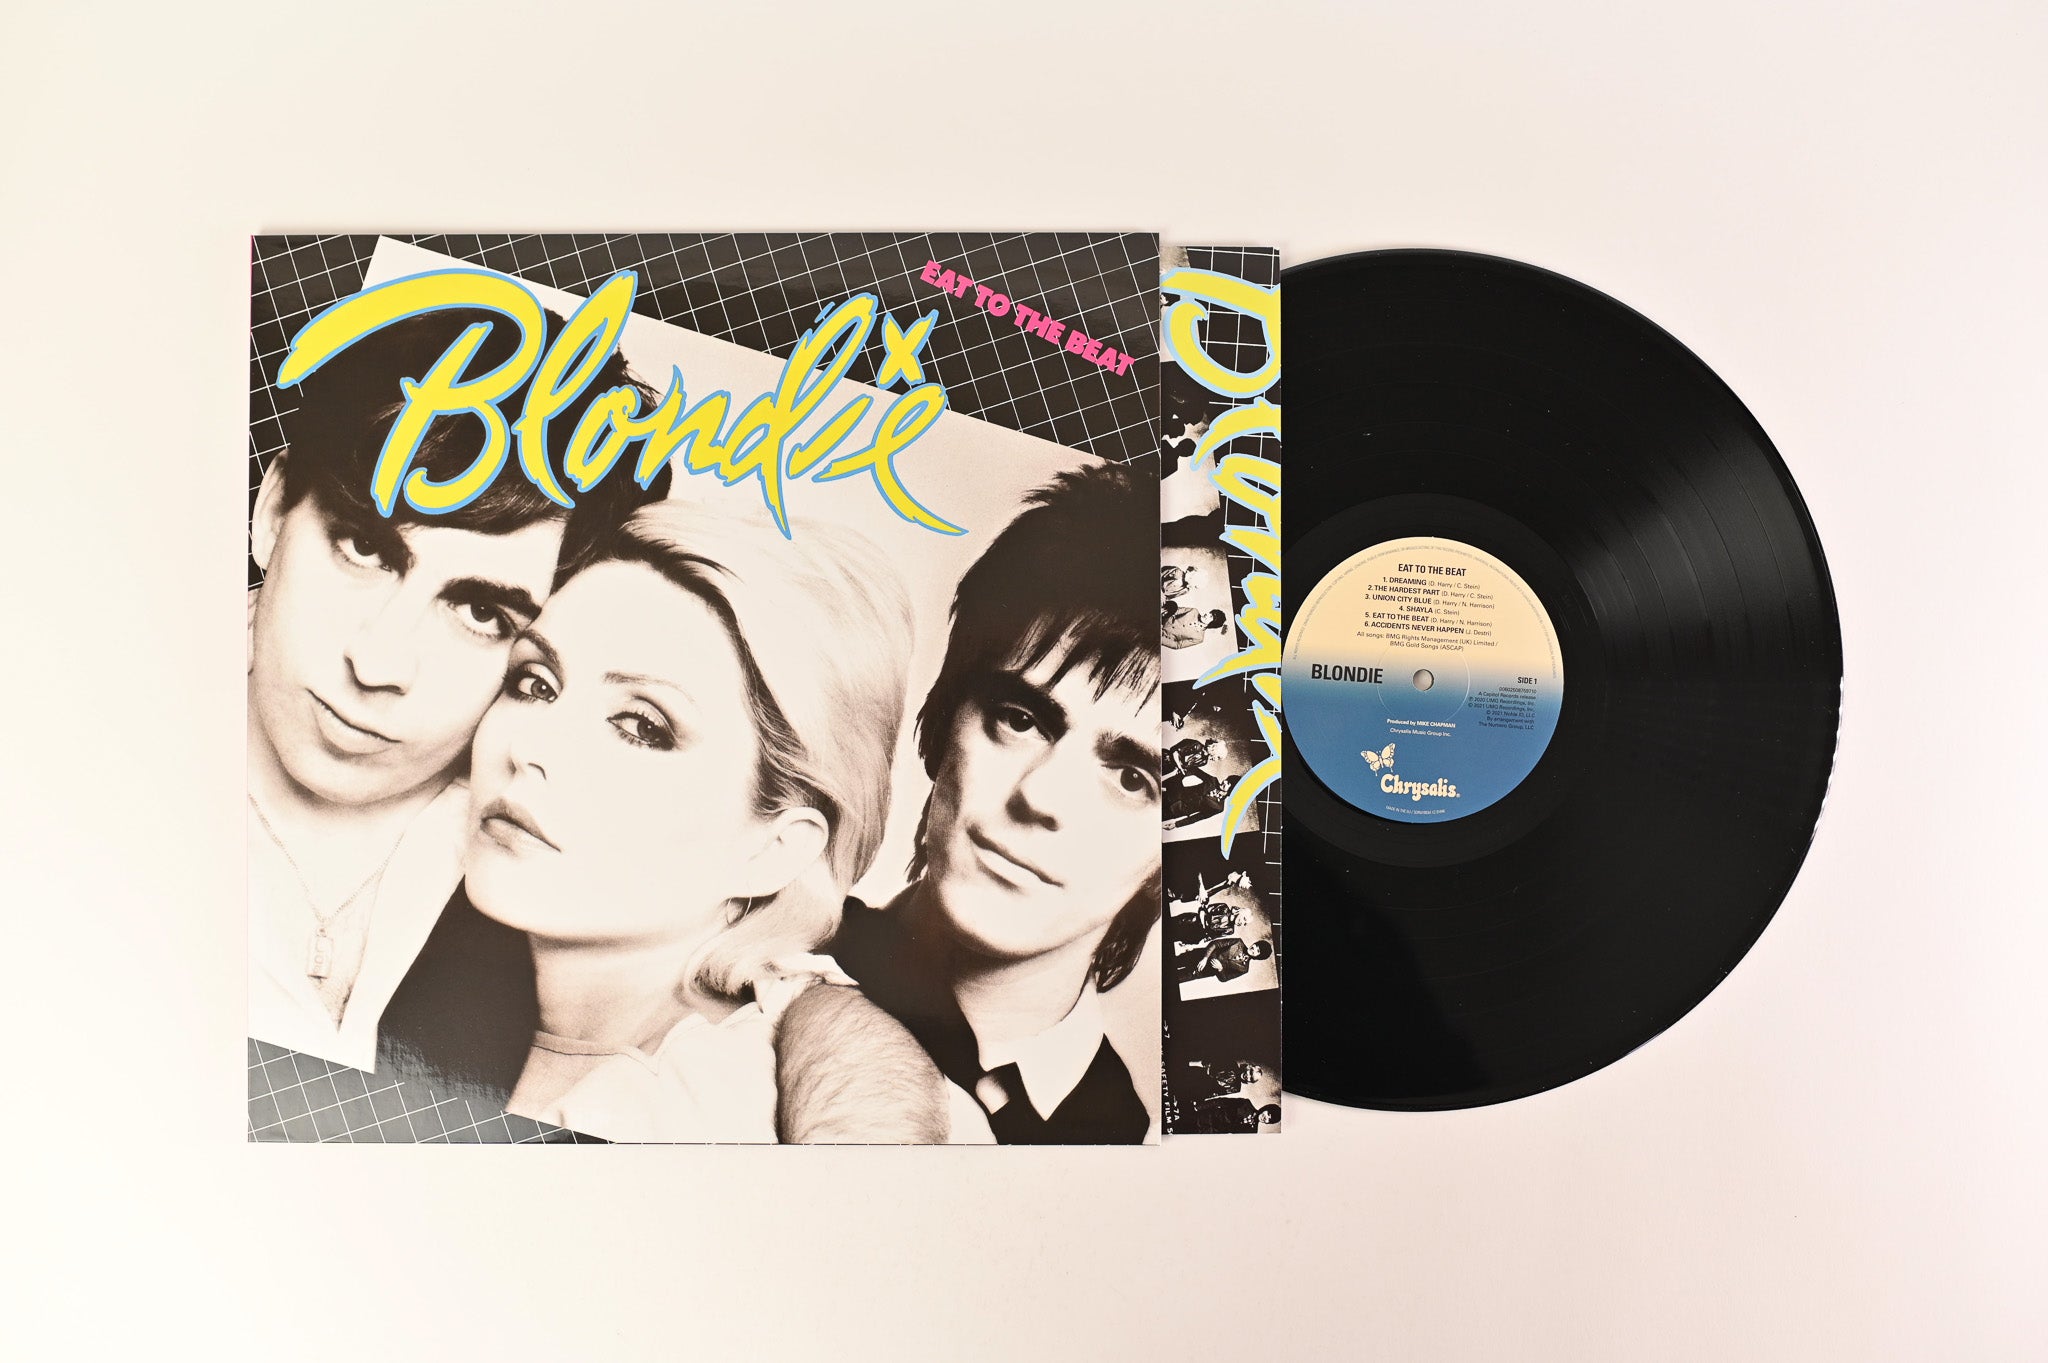 Blondie - Against The Odds 1974-1982 on Numero / UMC - Super Deluxe Edition Box Set